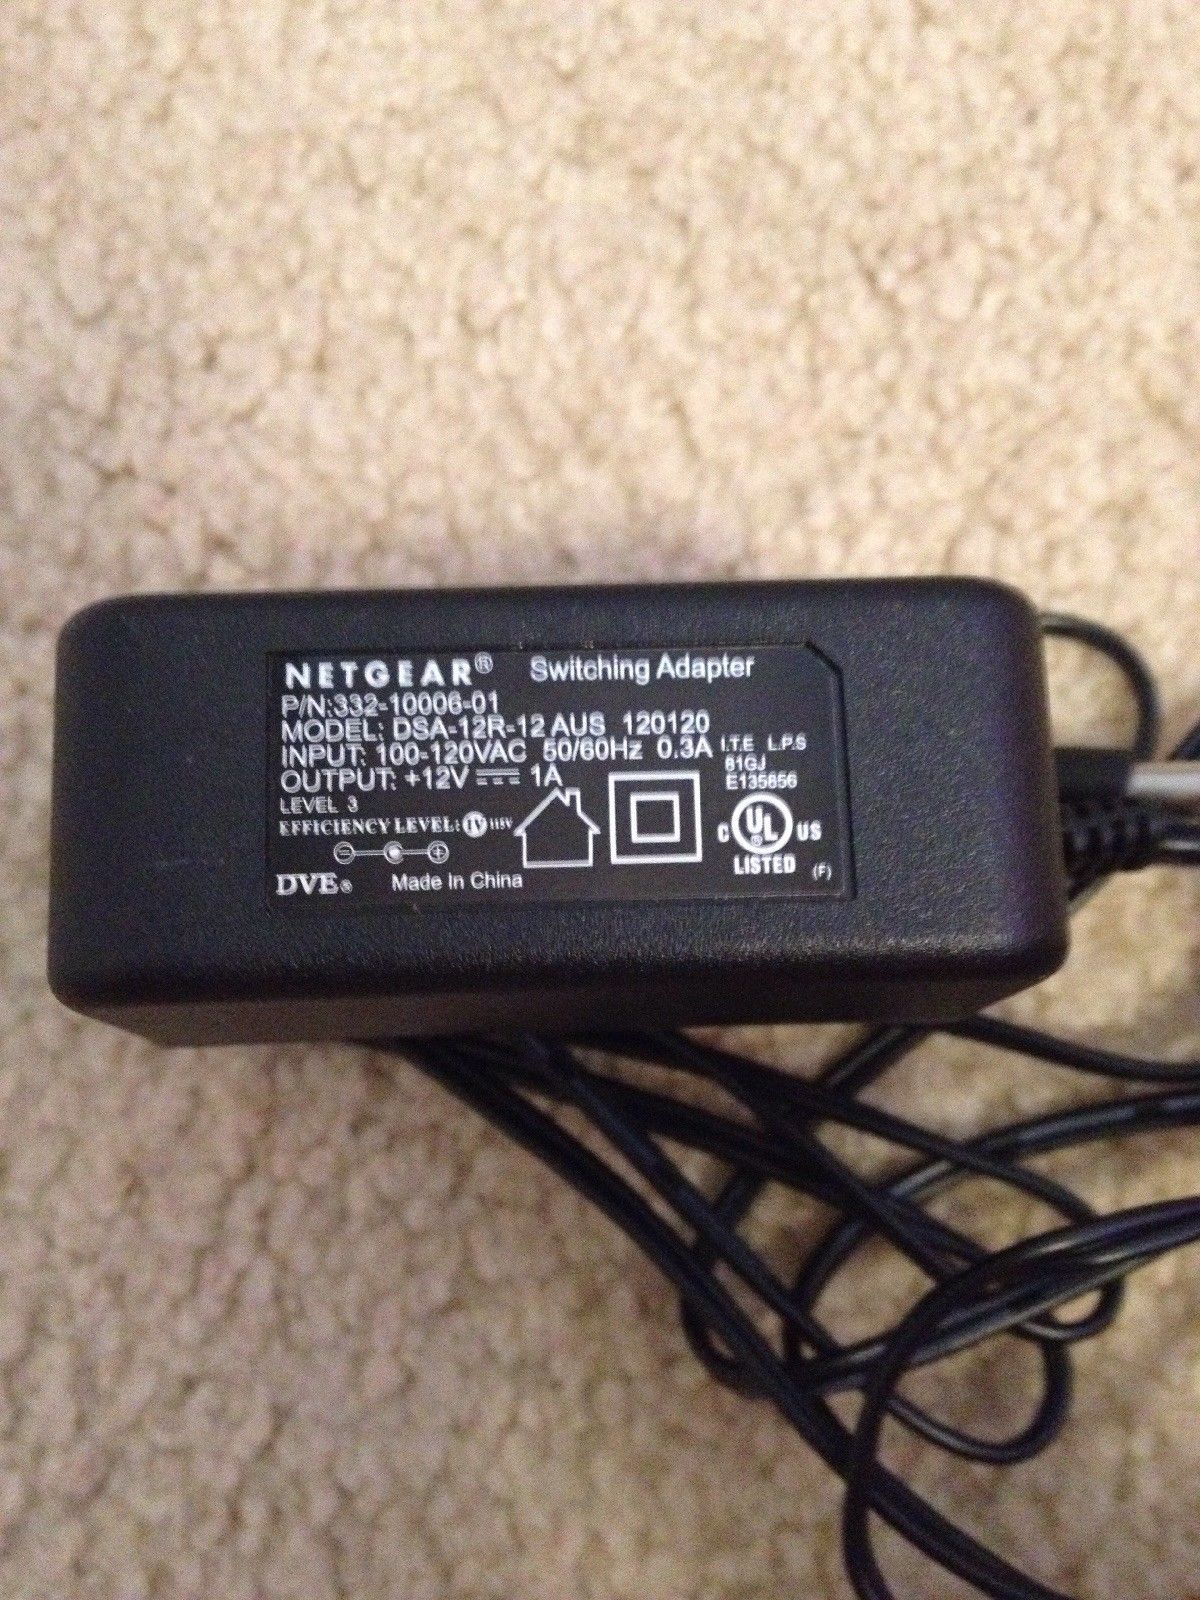 NEW Netgear DSA-12R-12AUS 120120 12V 1A 332-10006-01 Switching AC Adapter Power Supply Charger